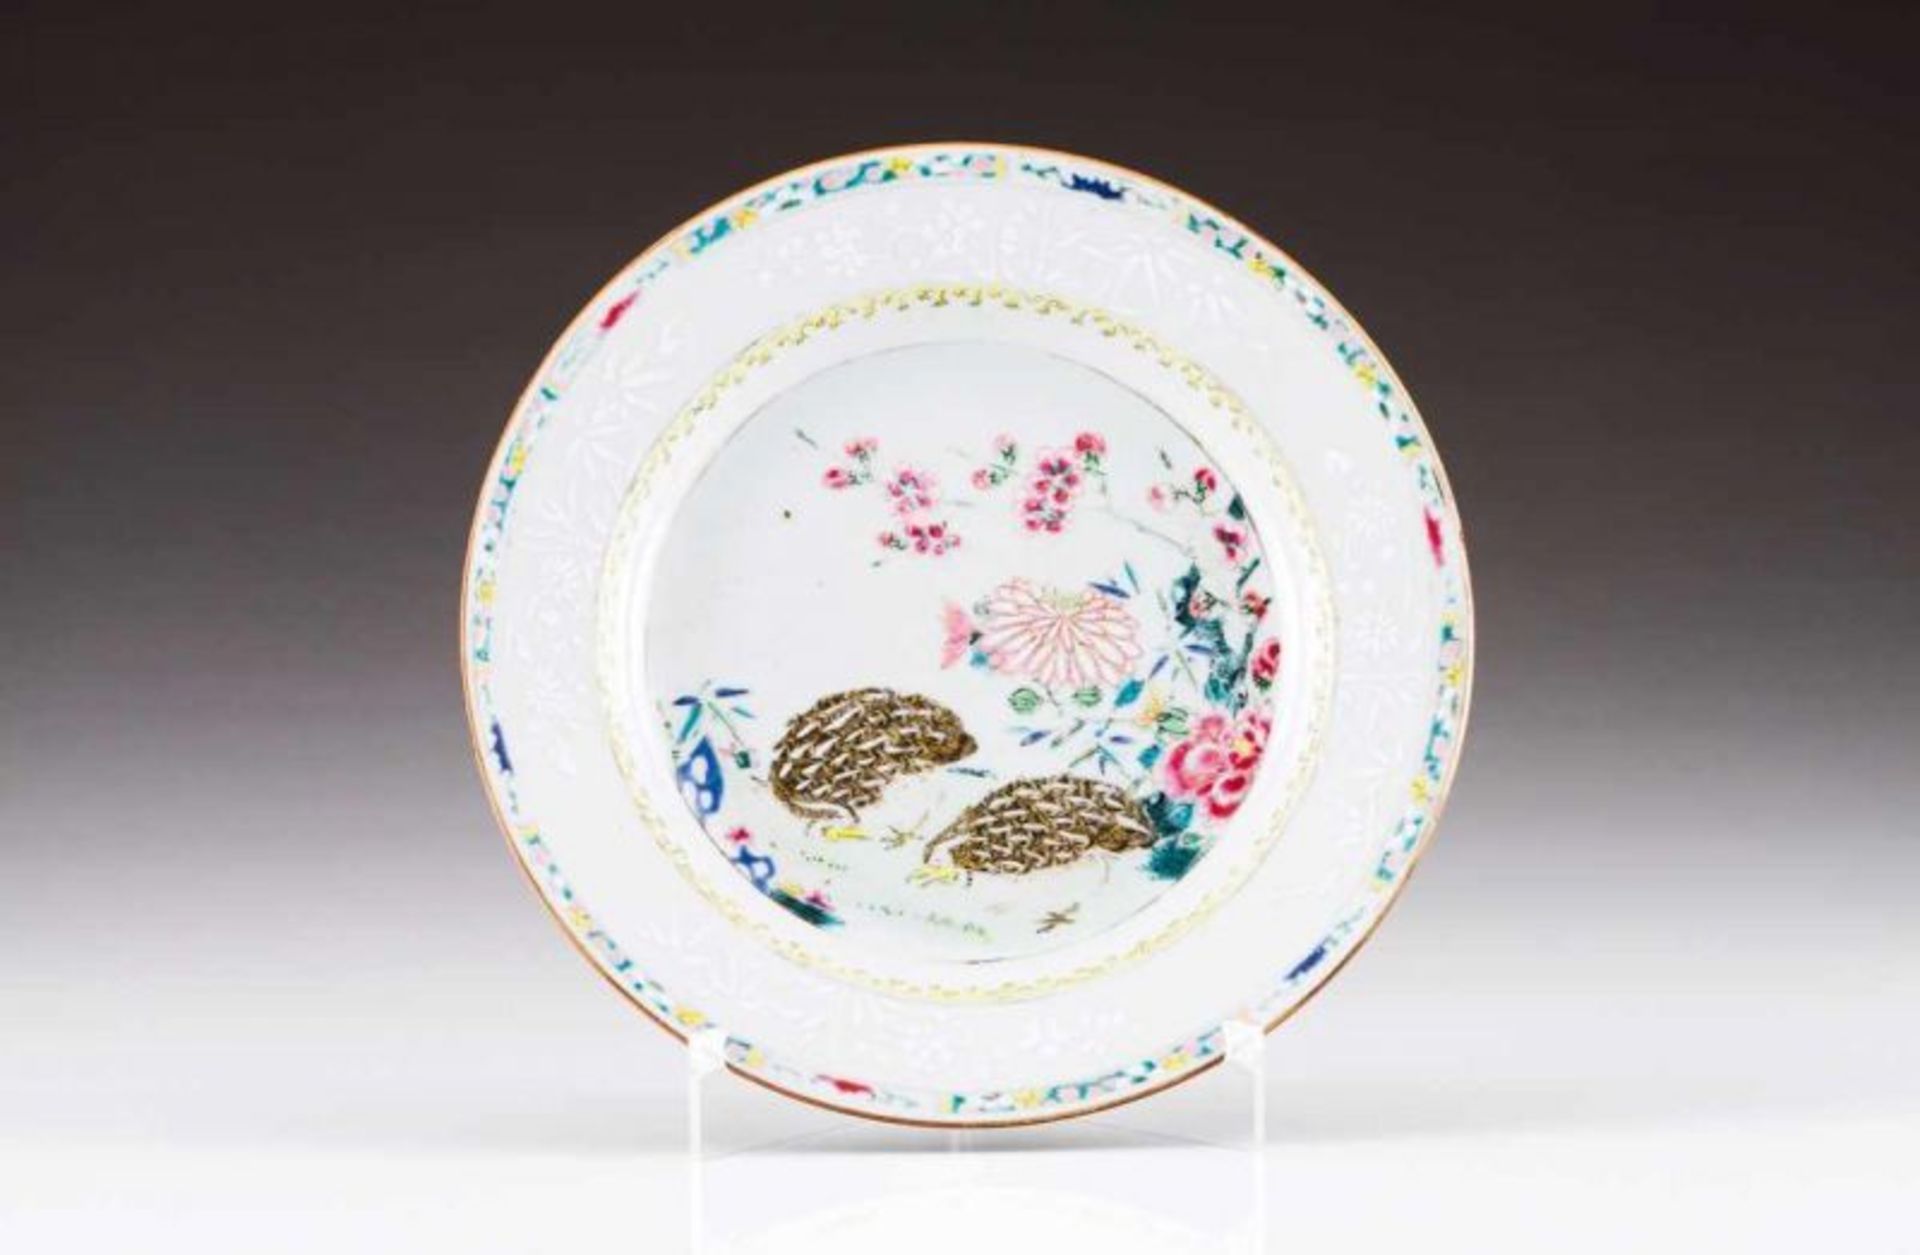 Plate Chinese export porcelain Polychrome decoration with Famille Rose and white enamels At the